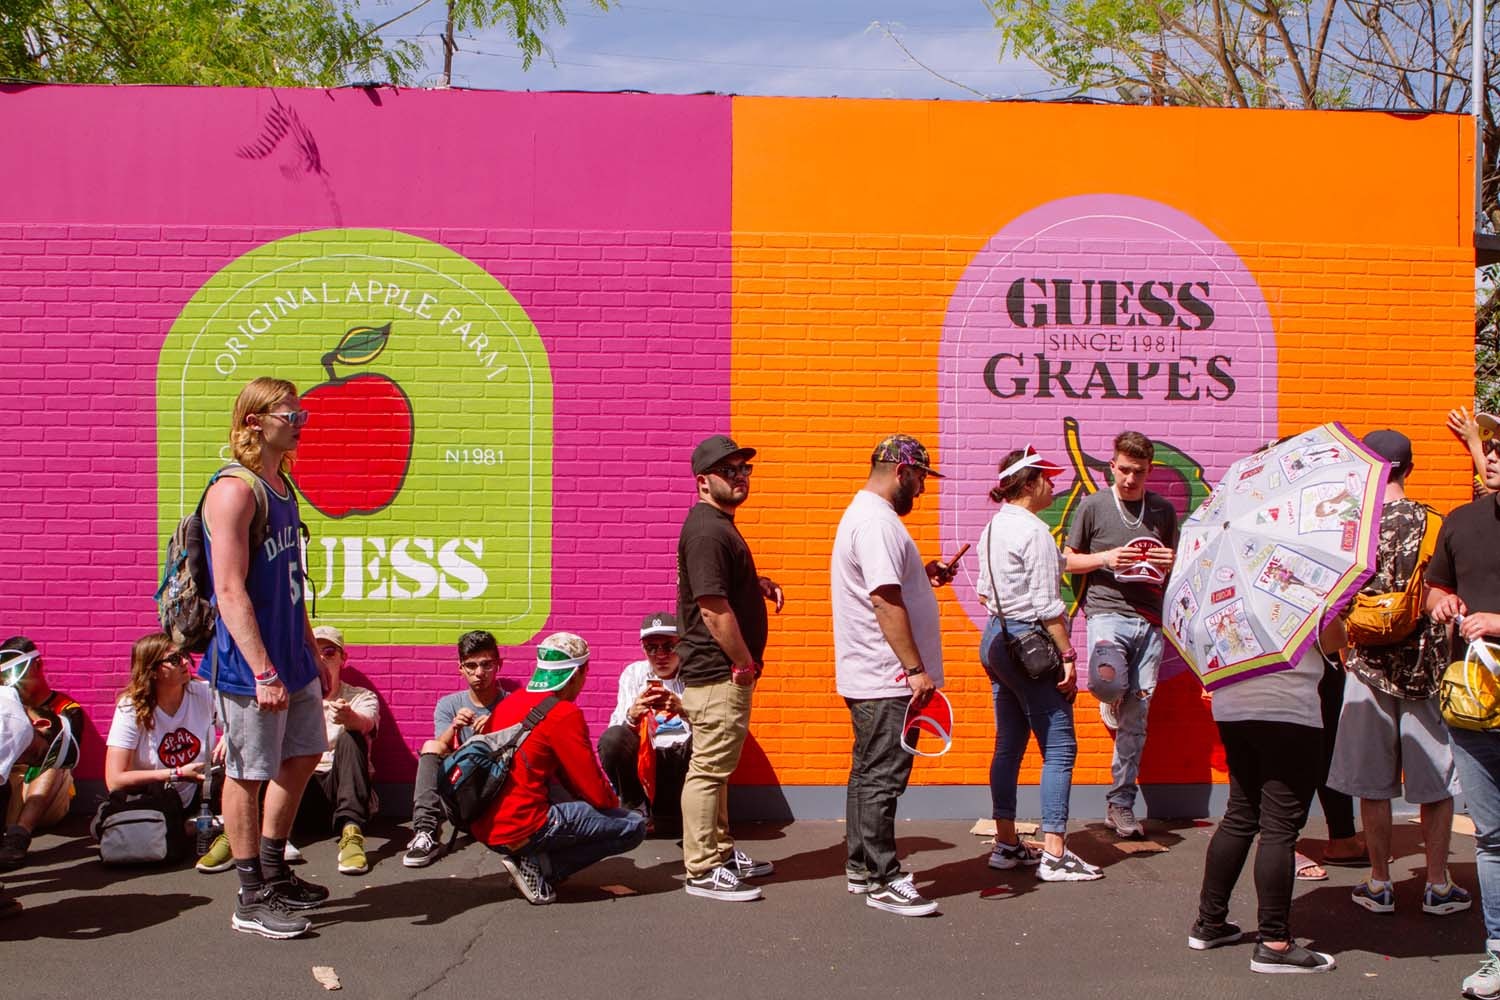 Guess Farmers Market Event Recap 2018 Sean Wotherspoon Round Two Chinatown Market Pleasures Medicom Bearbricks The Pancake Epidemic Carrots Pintrill Cali Thornhill Dewitt